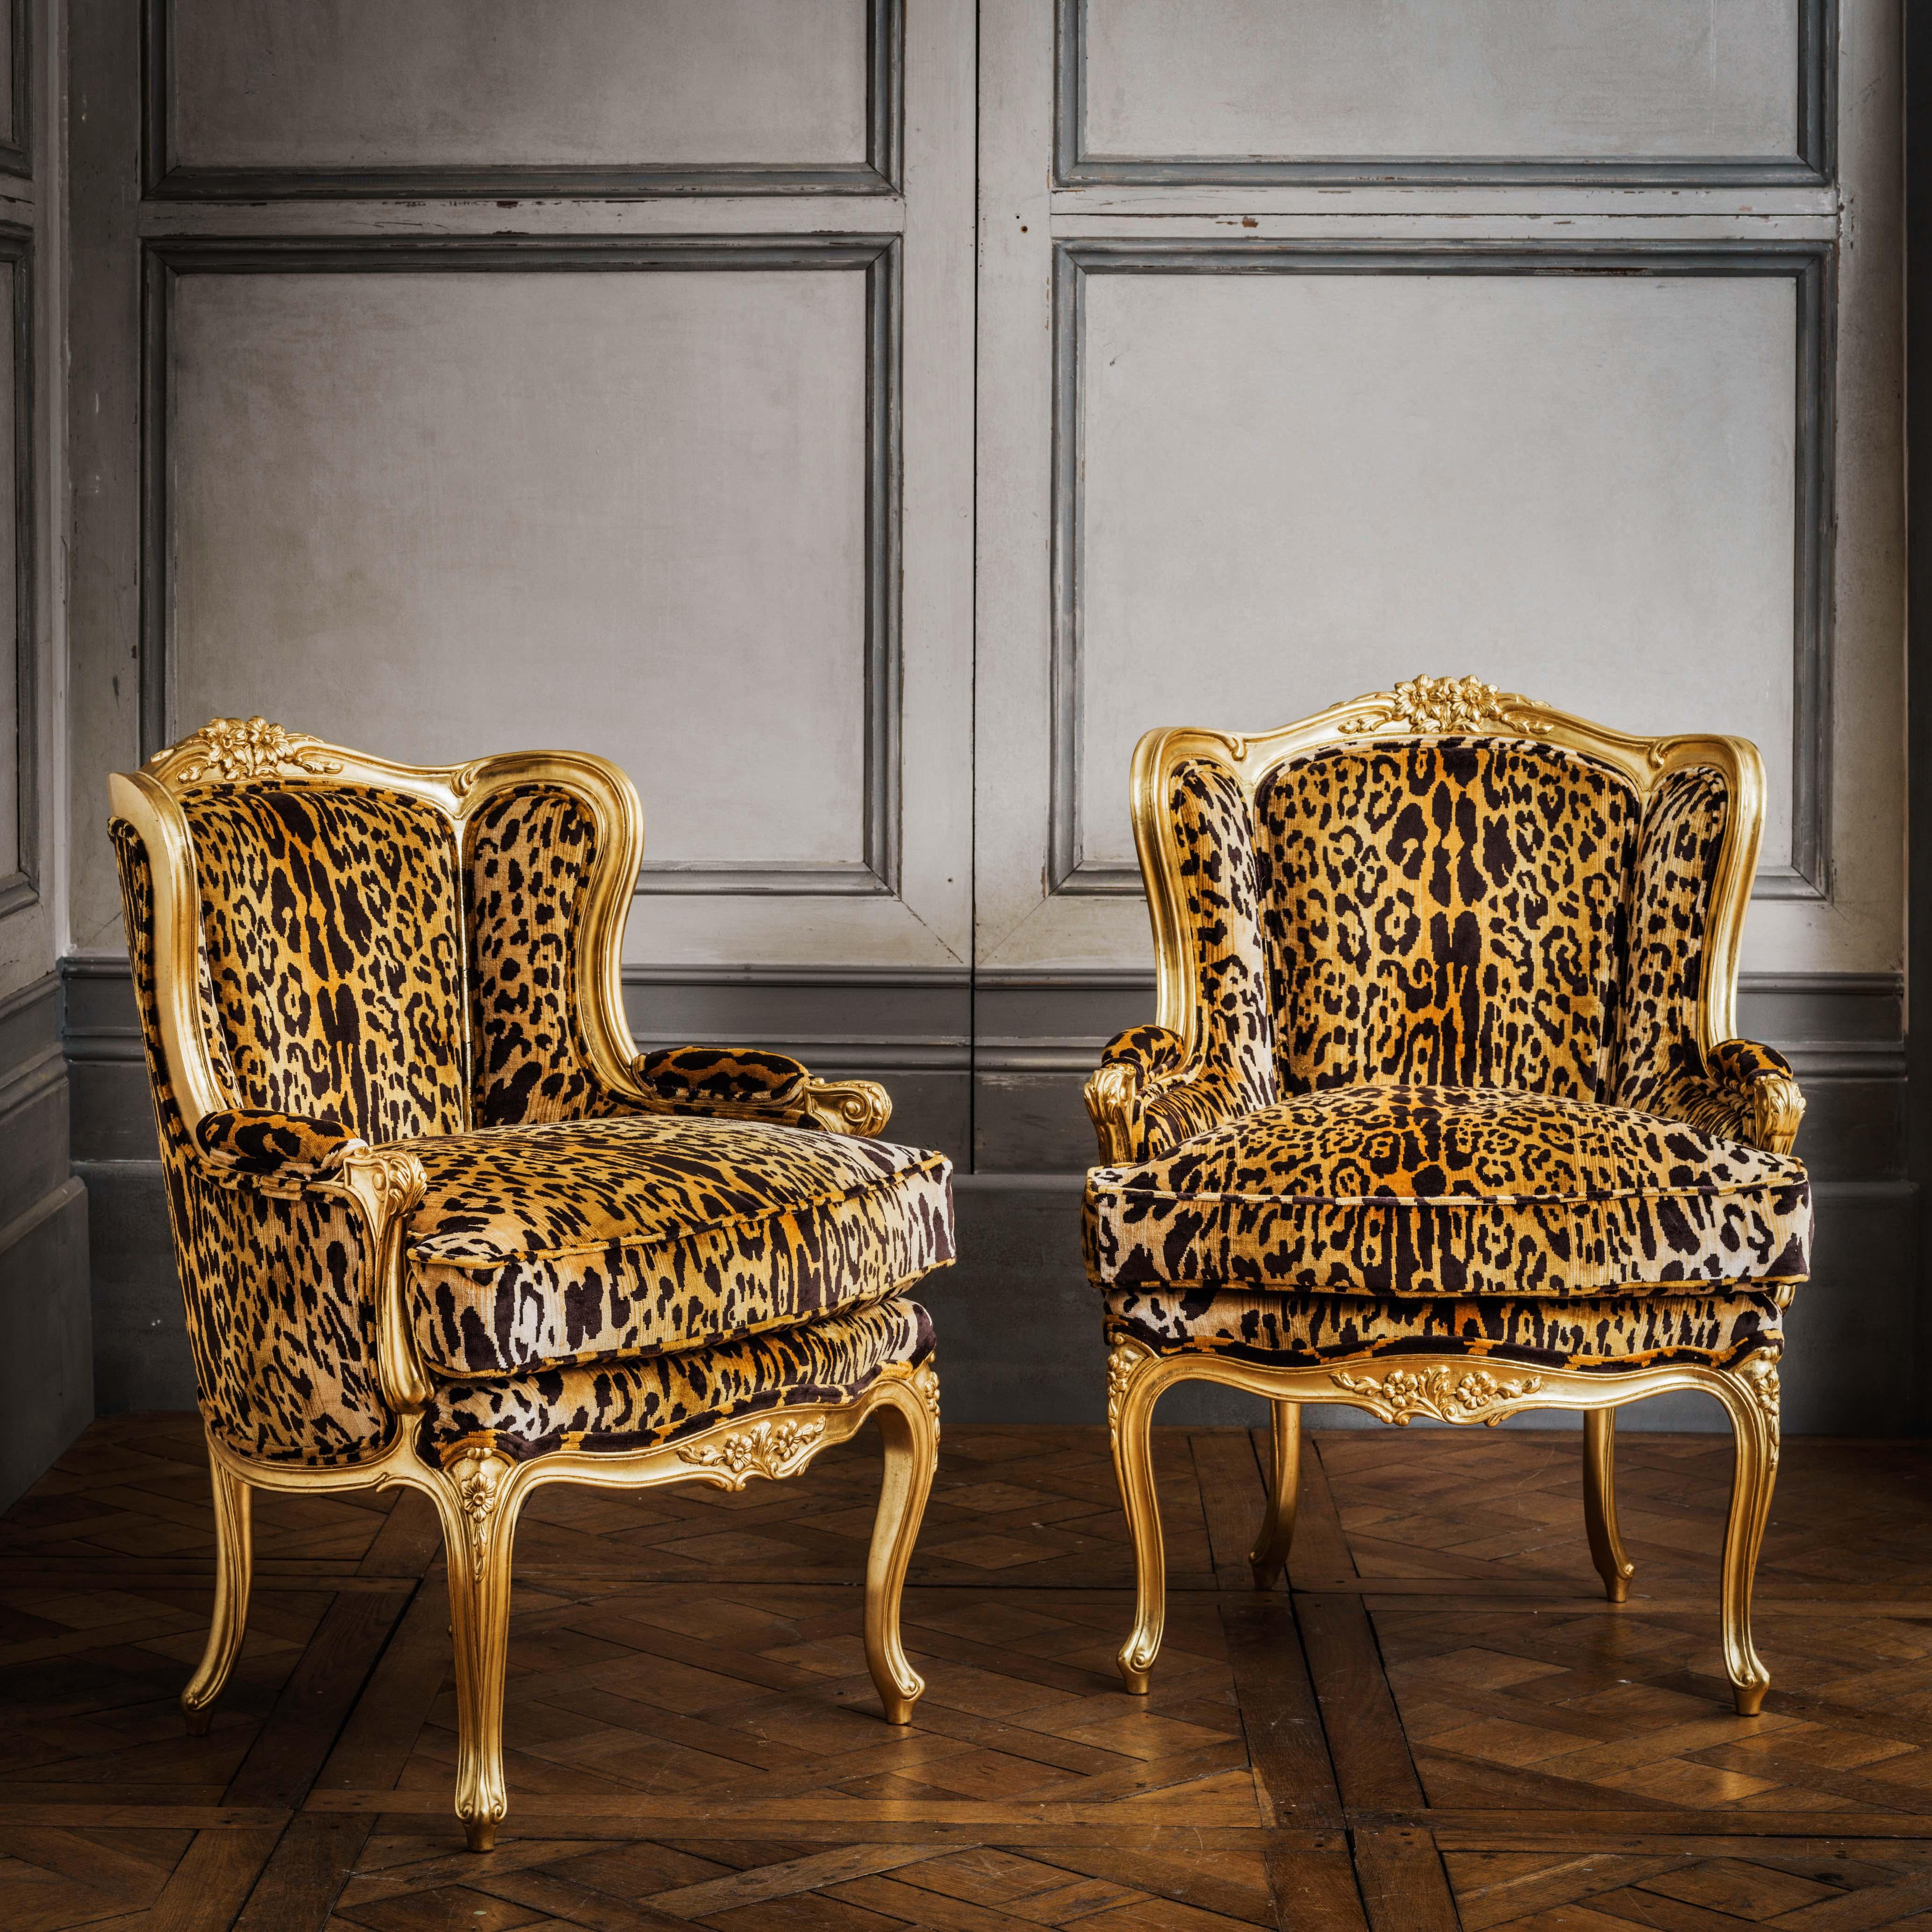 Louis XV Style Giltwood Duchesse Brissée, Chaise Longue & Pair of Chairs In Excellent Condition For Sale In London, Park Royal